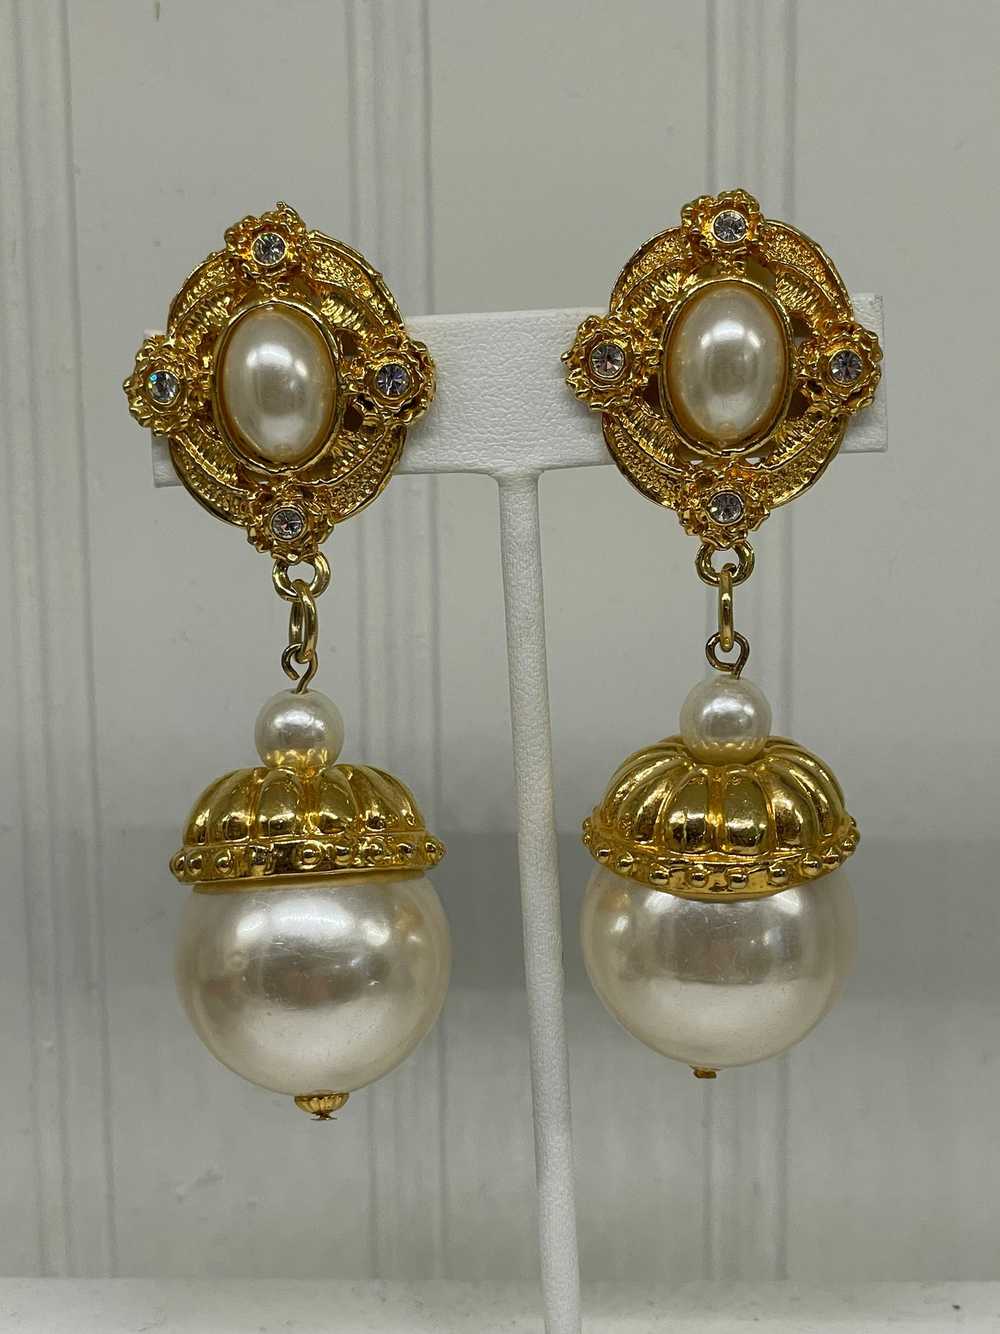 Large Gold Pearl and Rhinestone Earrings - image 1